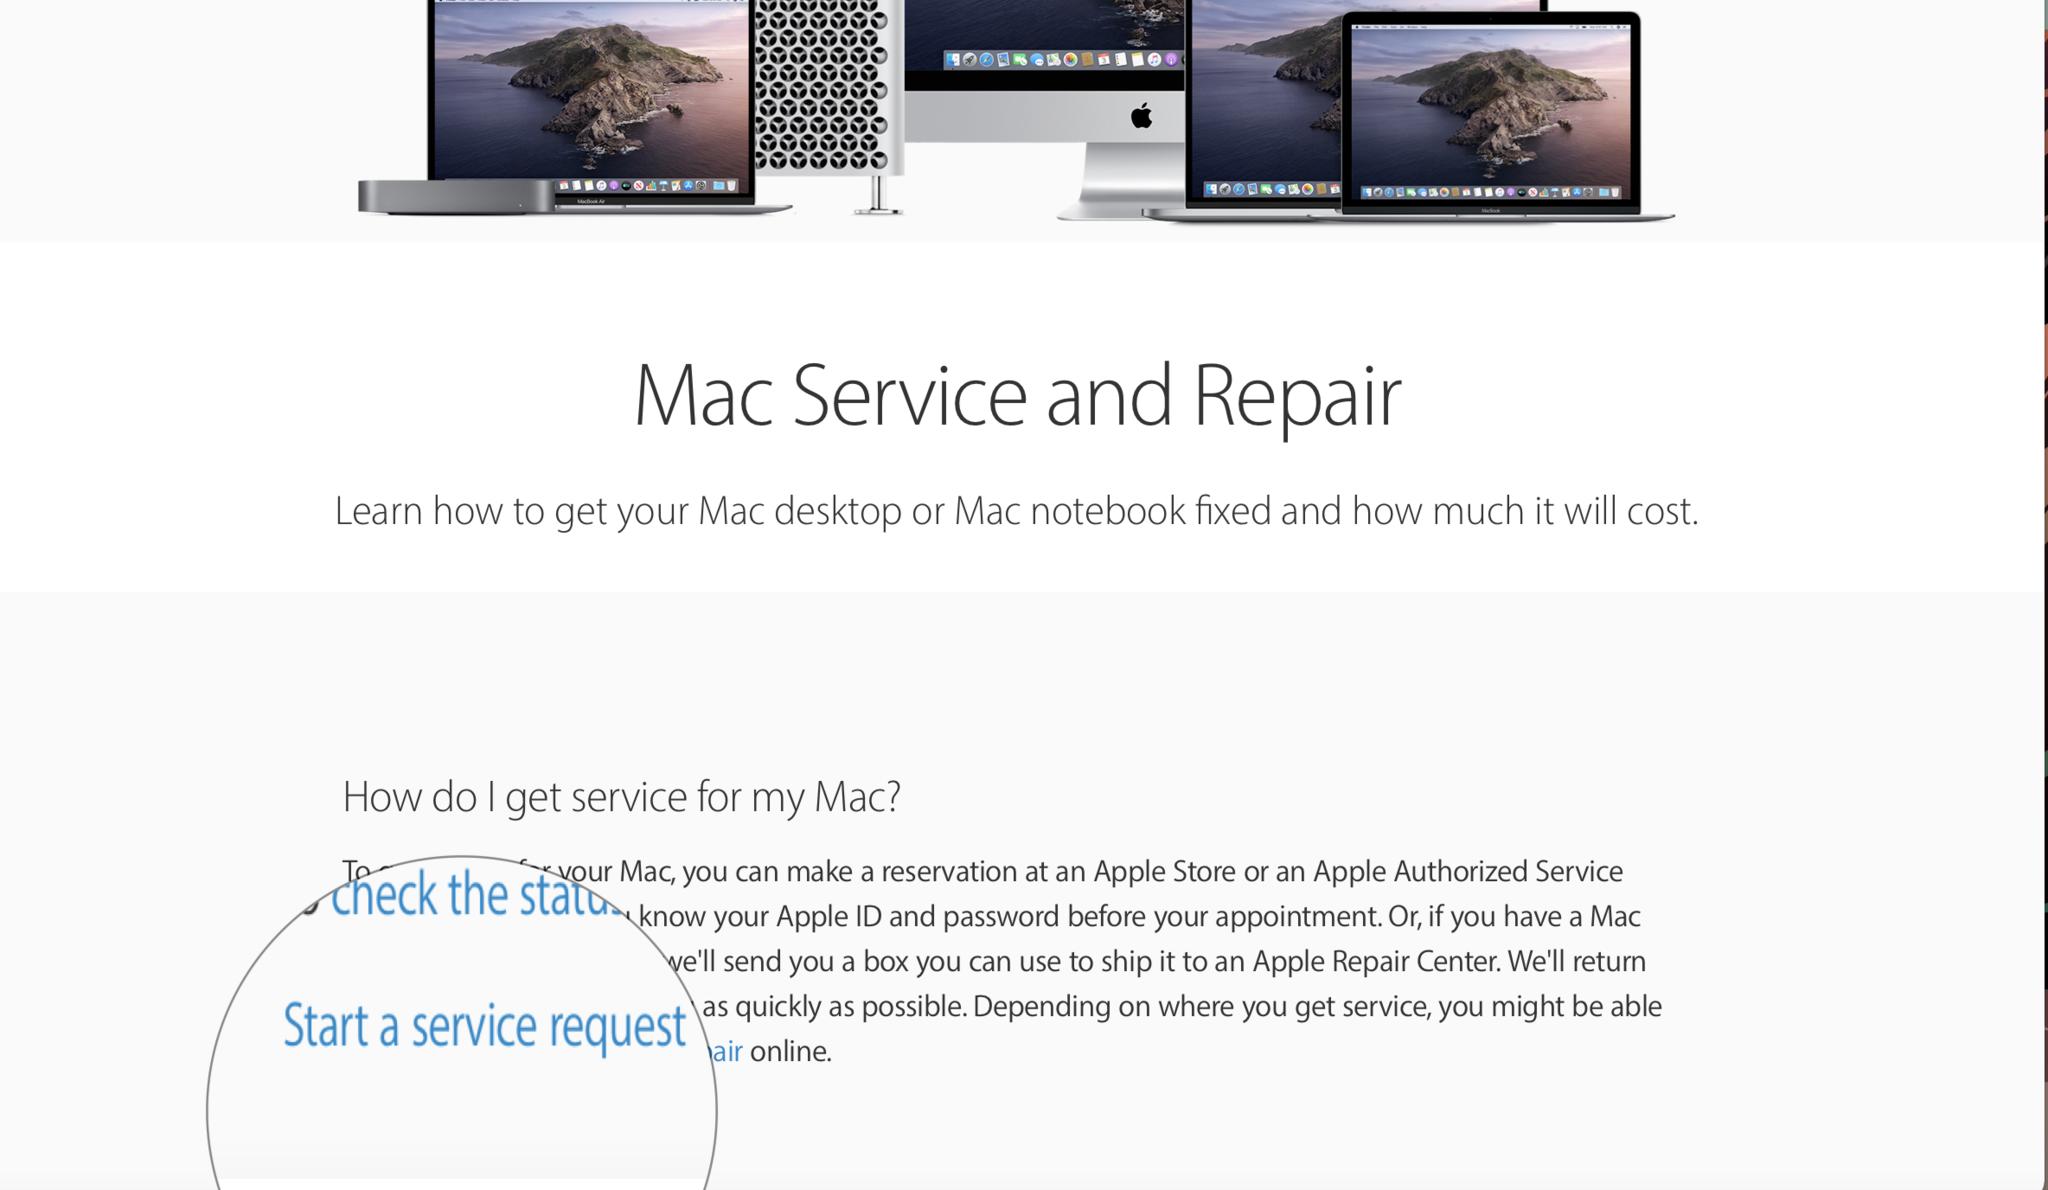 Getting Apple Support  - How to set up a Genius Bar appointment or repair - start a service request 